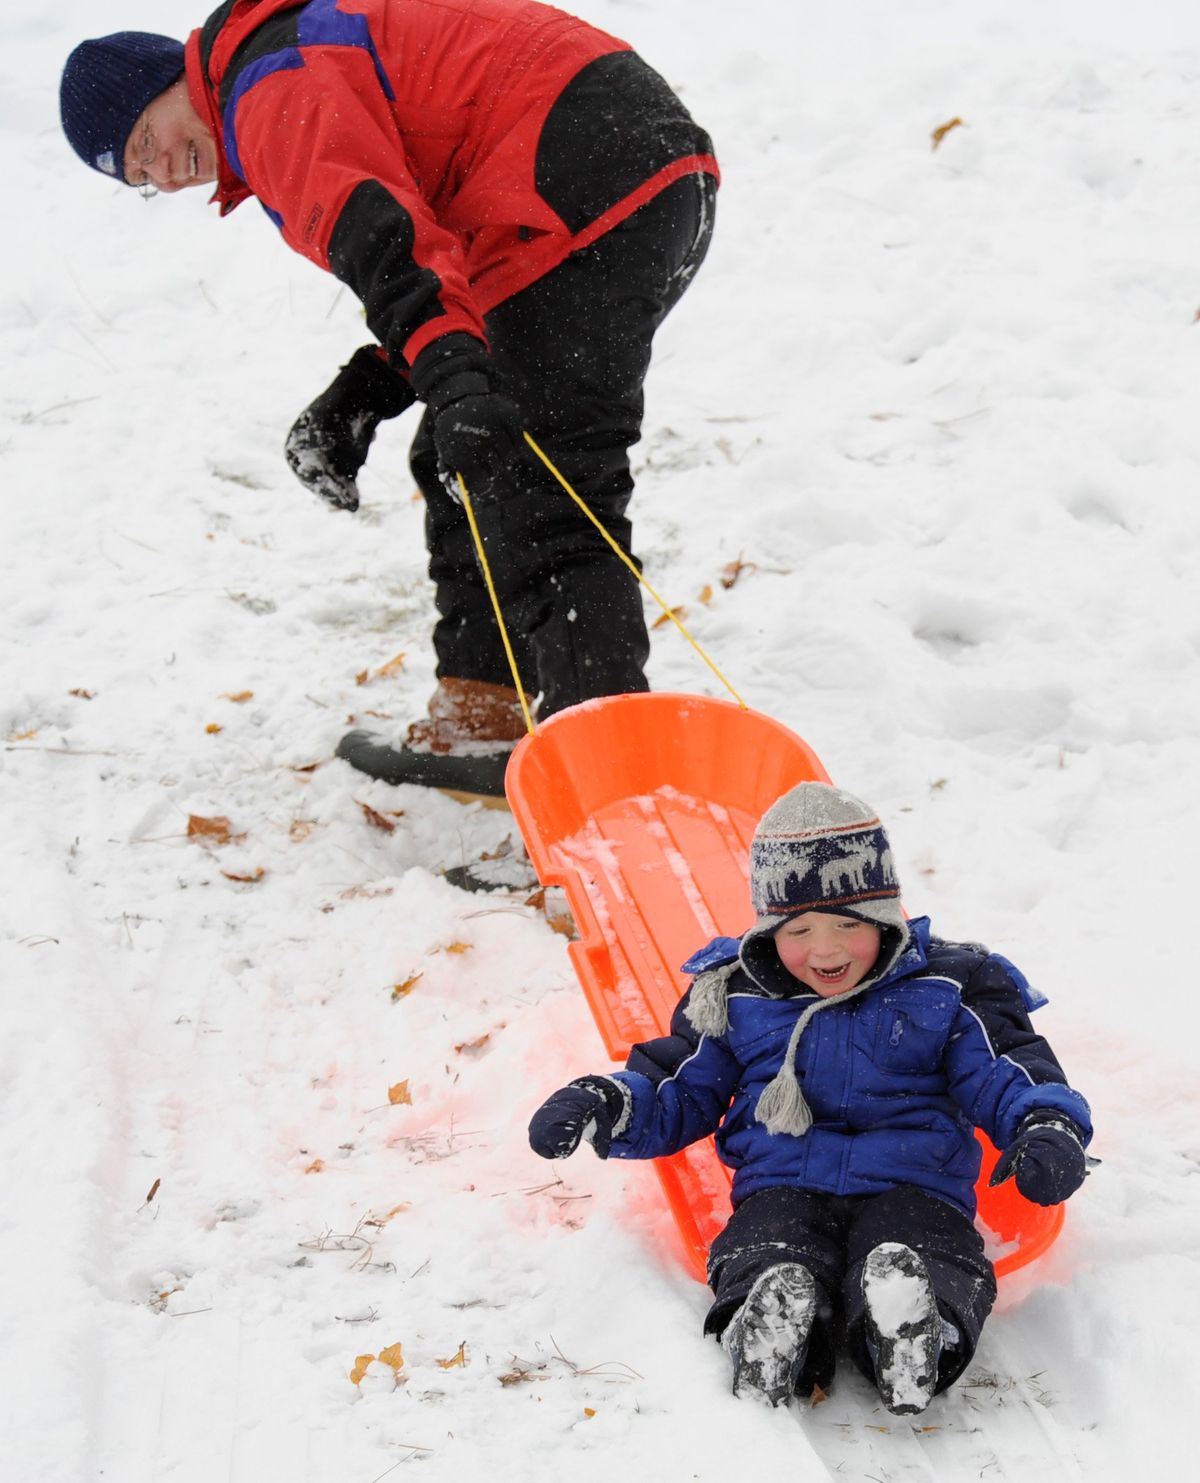 Christopher Mingeaud, left, struggles to get his son, Benjamin Mingeaud, 3, up a small sledding hill on Nov. 22, 2010, at Manito Park.  (JESSE TINSLEY/The Spokesman-Review)